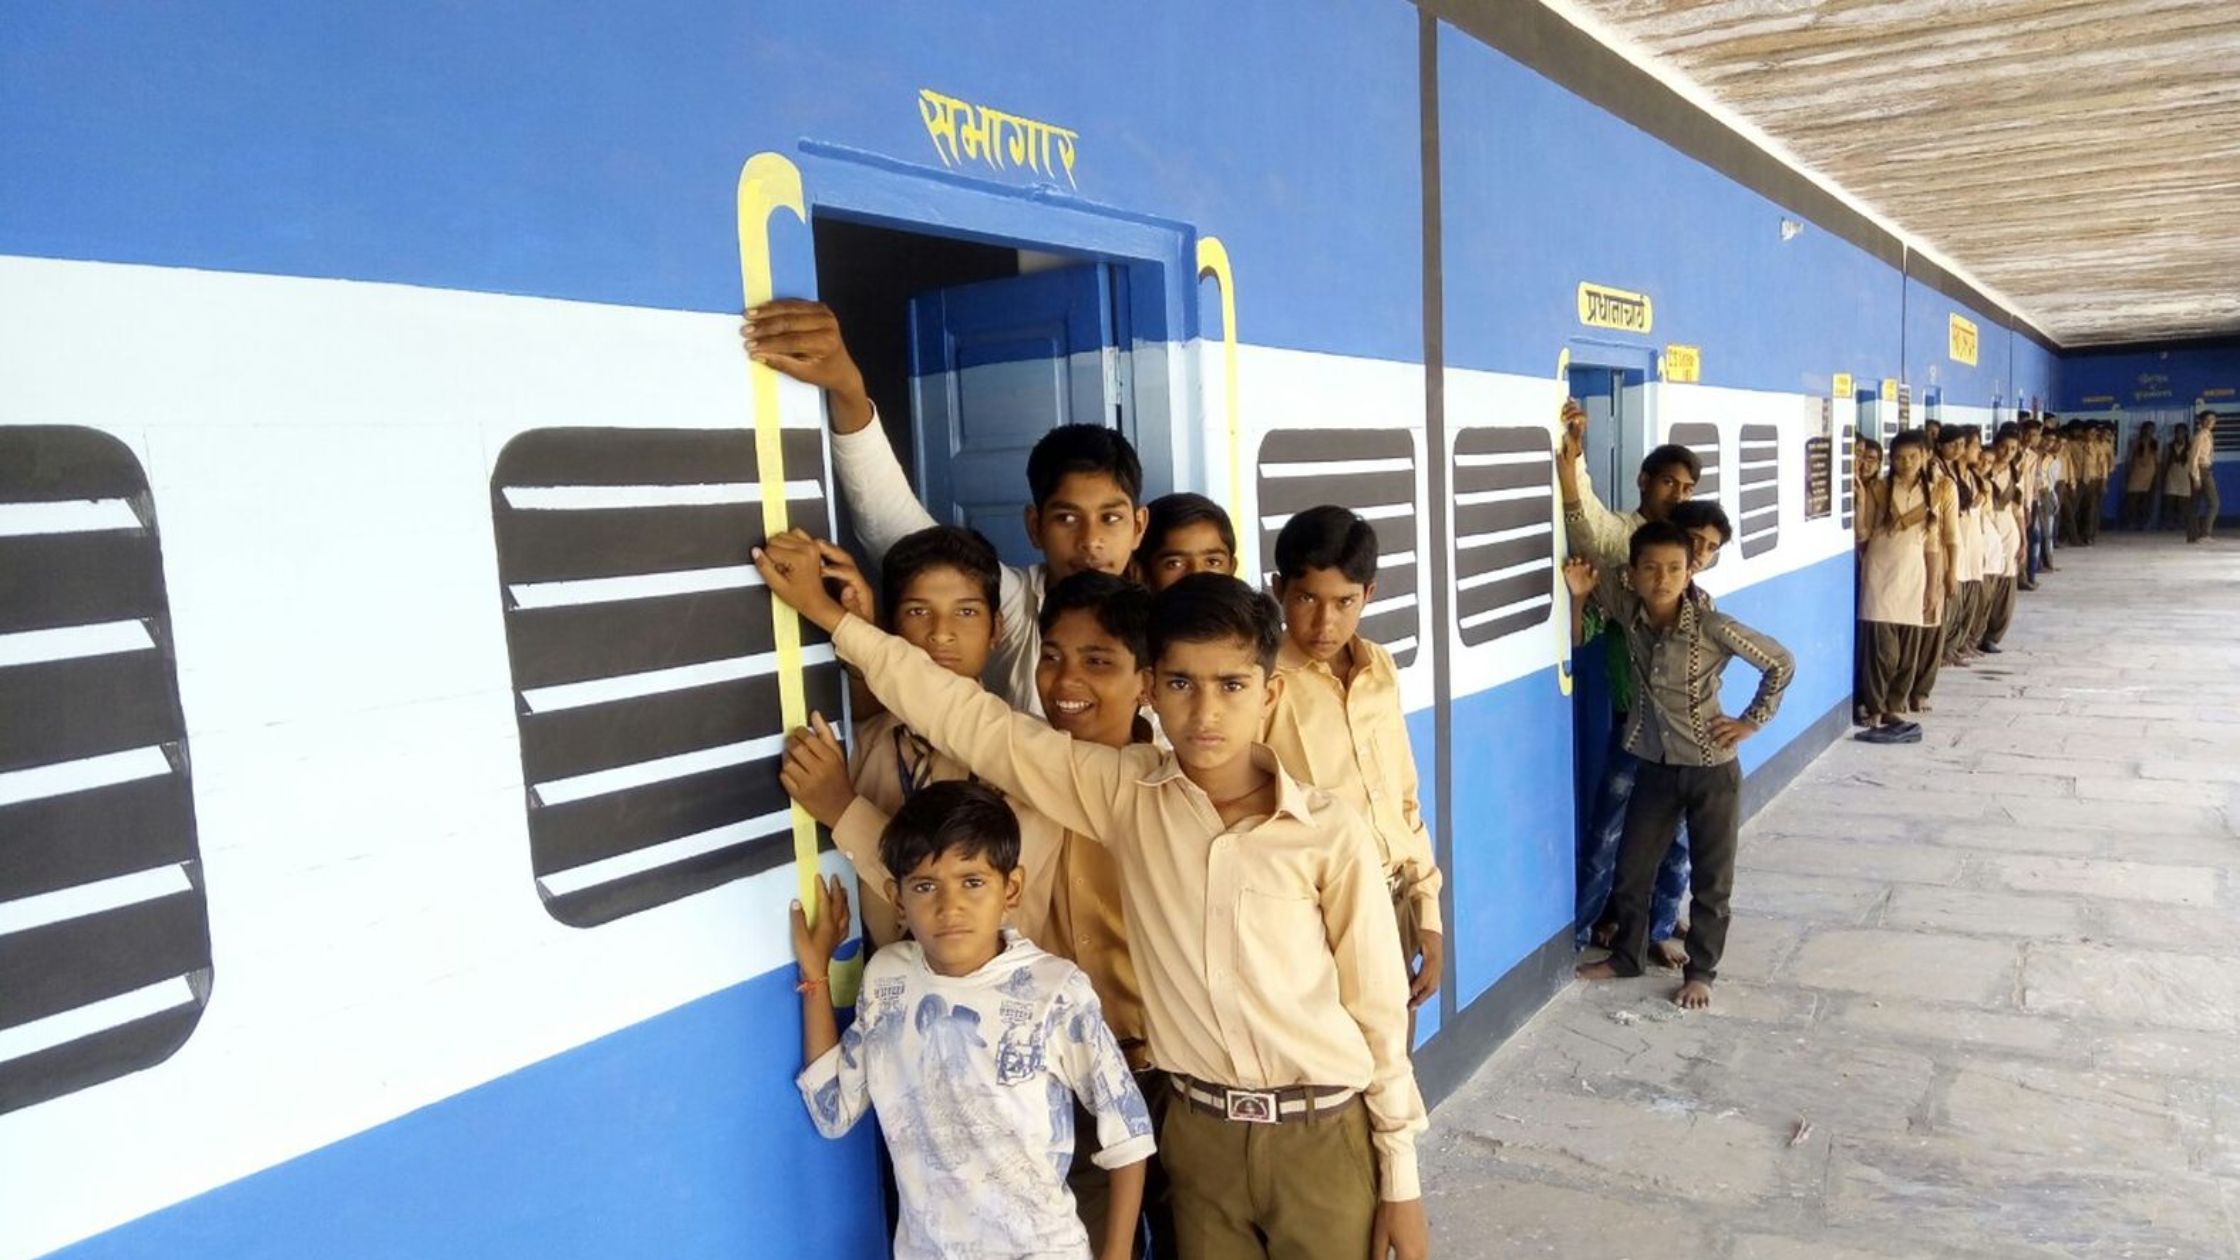 In this government school of Bihar, studies are done in the train